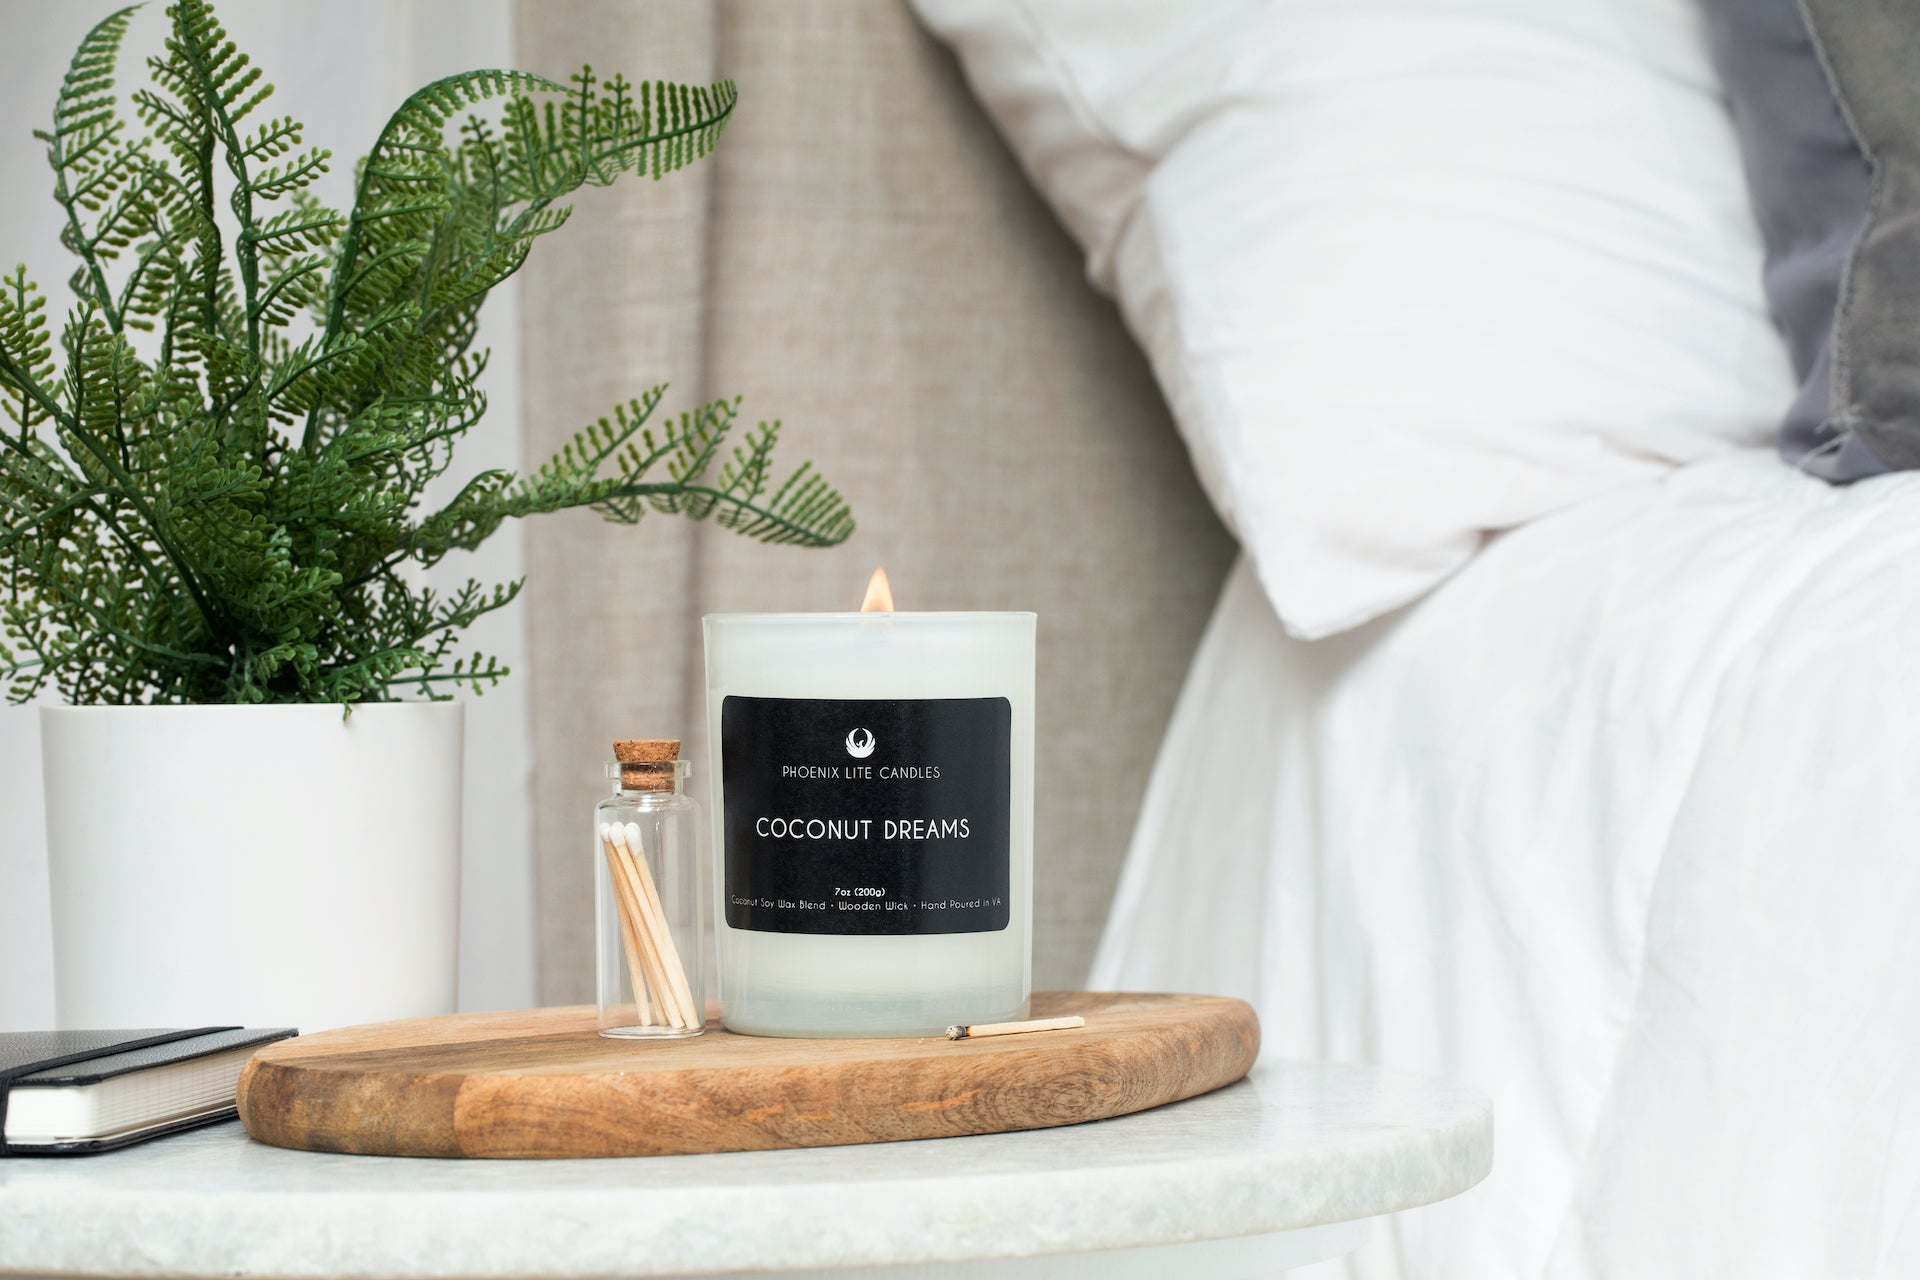 A photo of a lit seven ounce candle in a white jar labeled coconut dreams